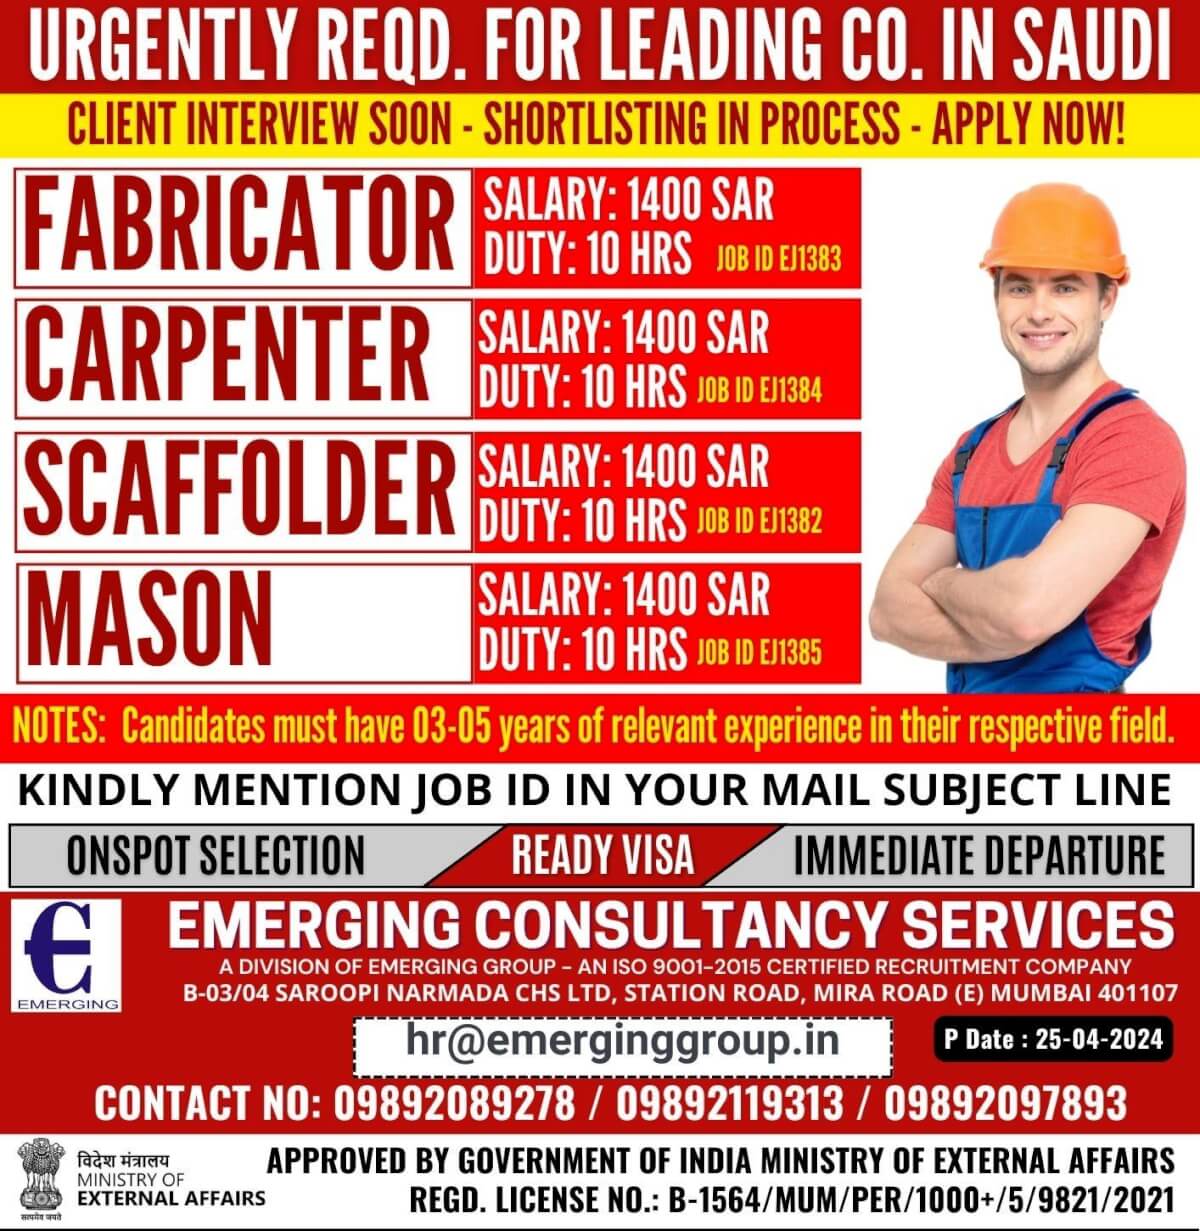 URGENTLY REQUIRED FOR LEADING COMPANY IN SAUDI ARABIA - CLIENT INTERVIEW SOON